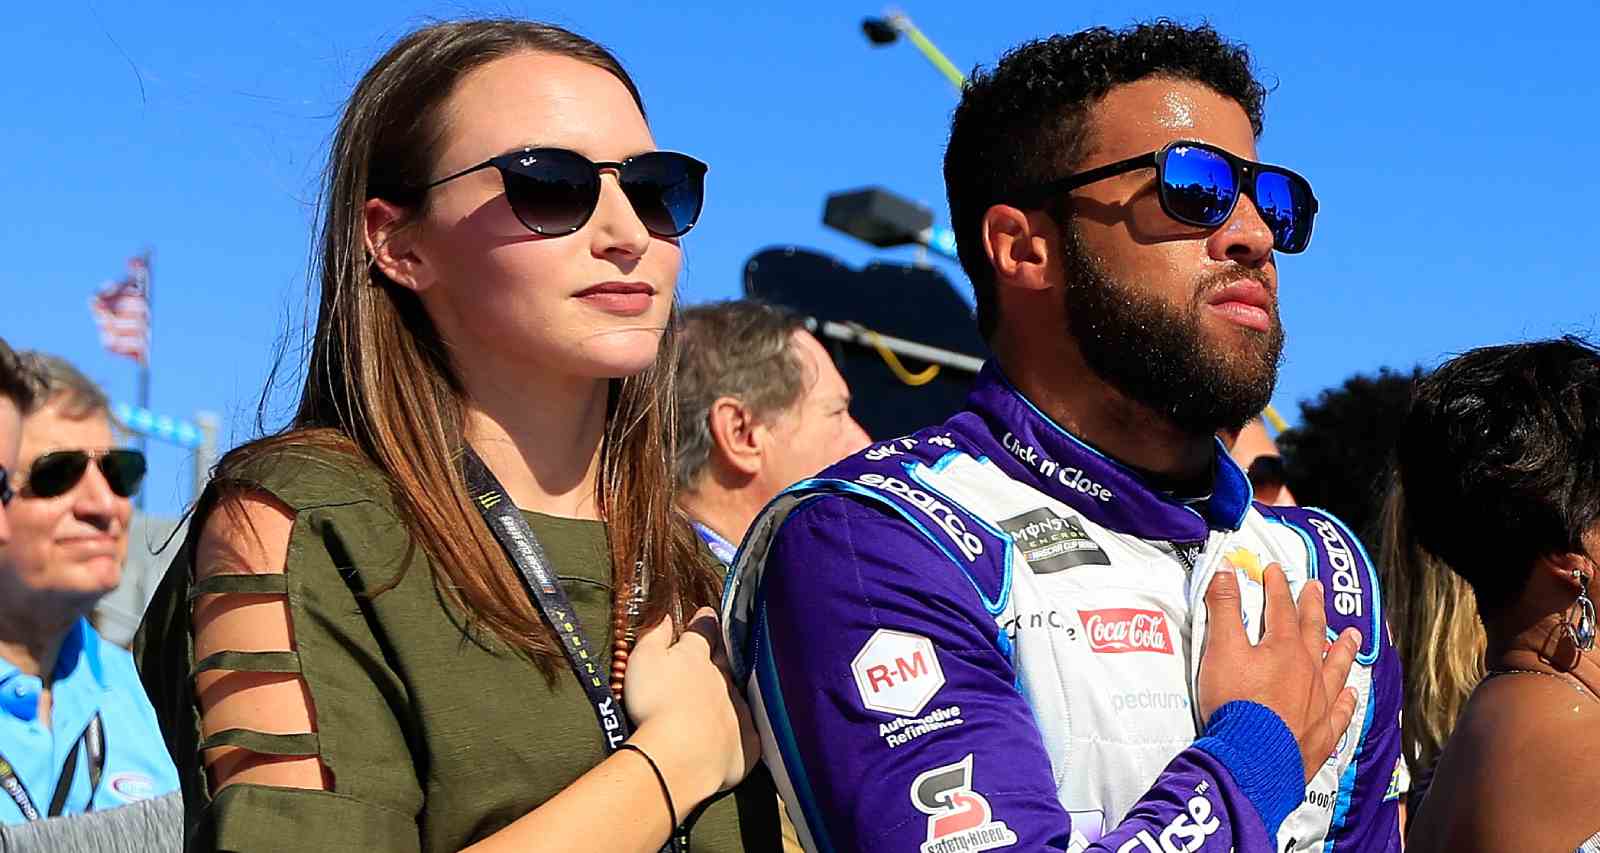 Amanda Carter Wiki, Age, Family, Siblings, Education, Career and Facts About Bubba Wallace’s Girlfriend